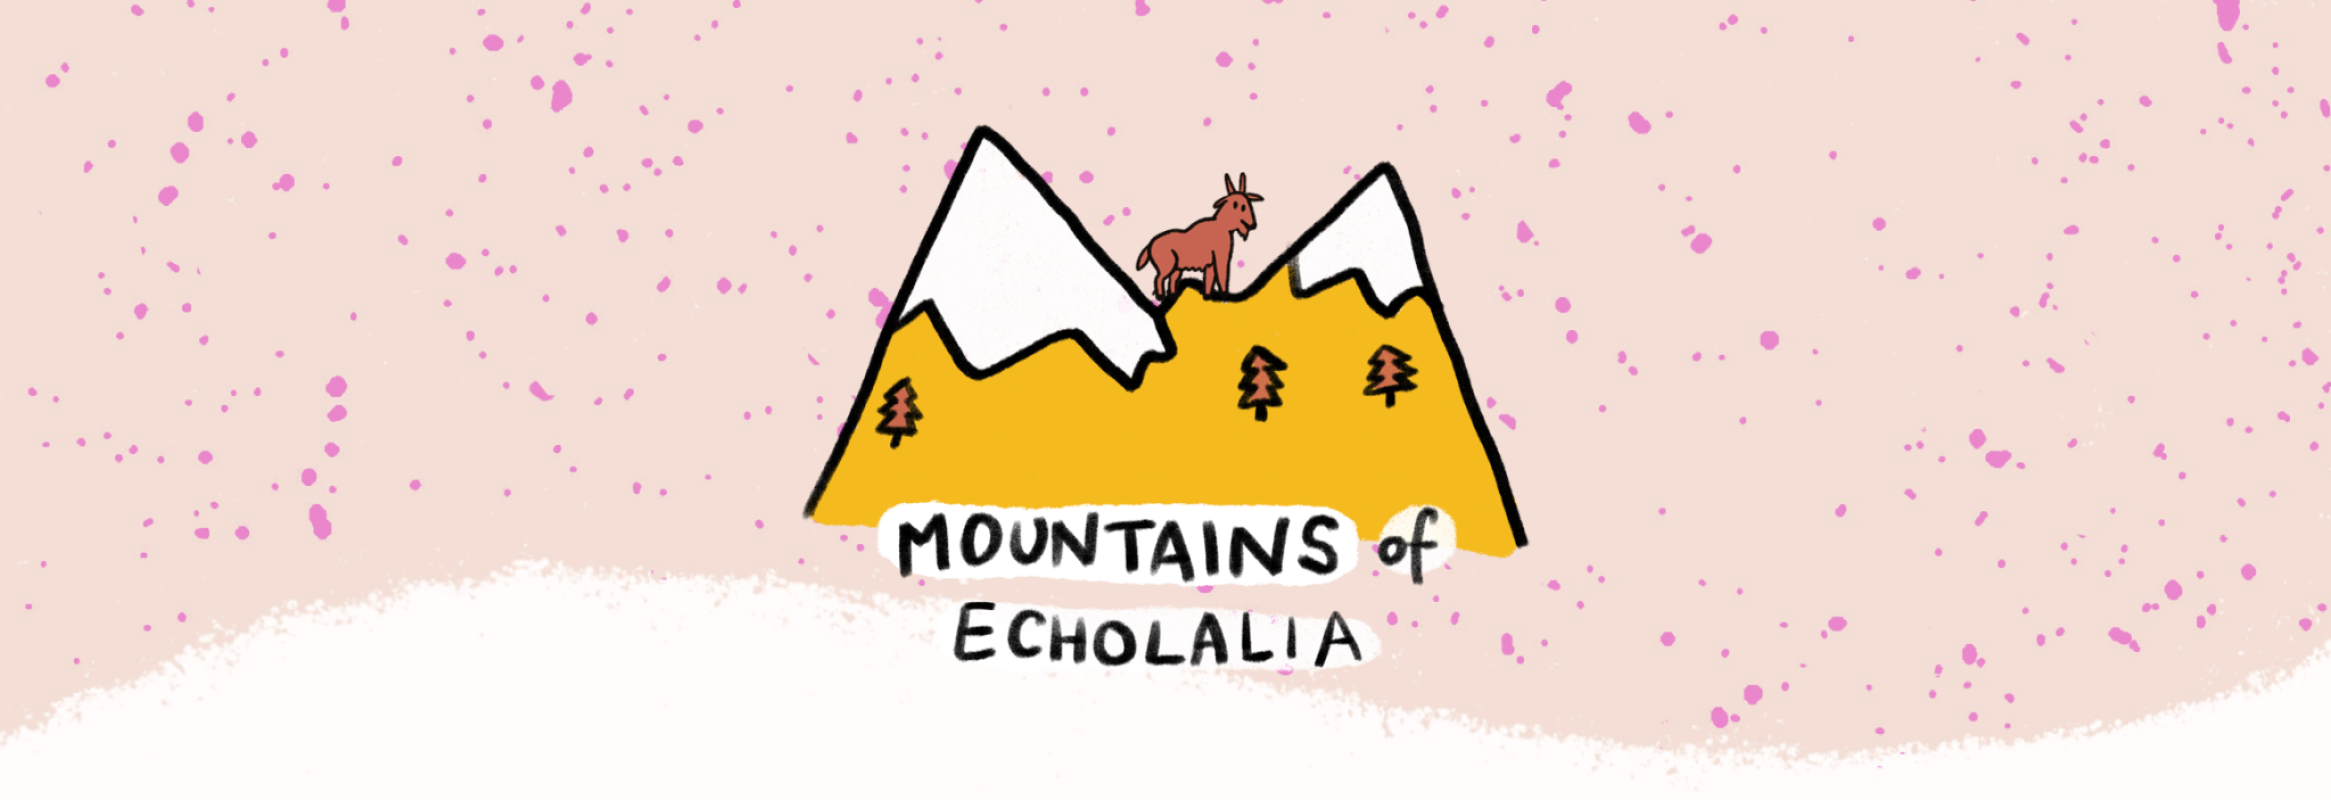 Illustration of a mountain with trees and a mountain goat. The text reads mountains of echolalia